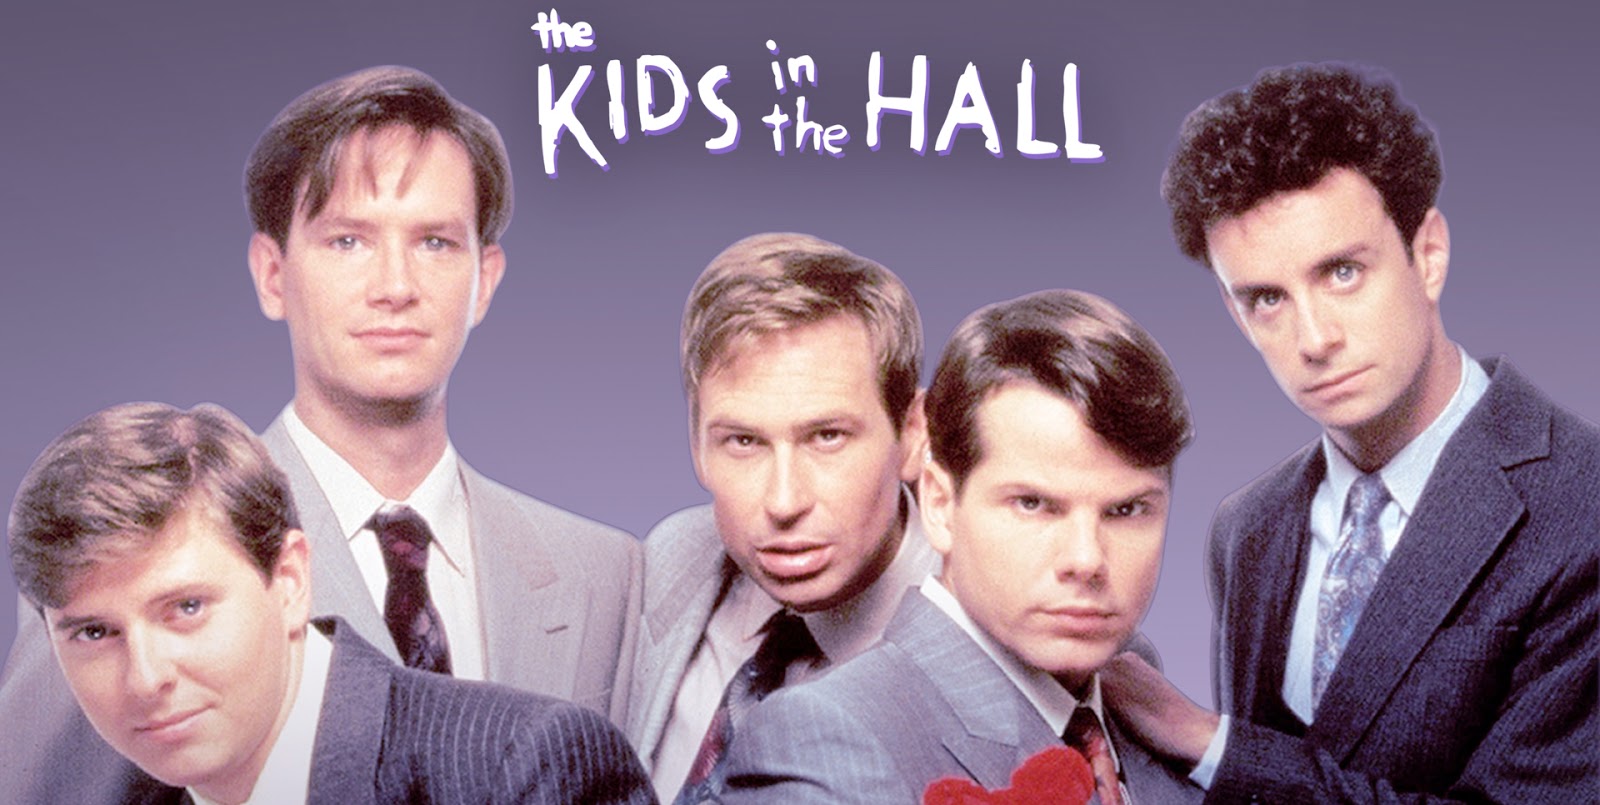 The Kids in the Hall. Mark MCKINNEY the Kids in the Hall. Hall Kids группа.